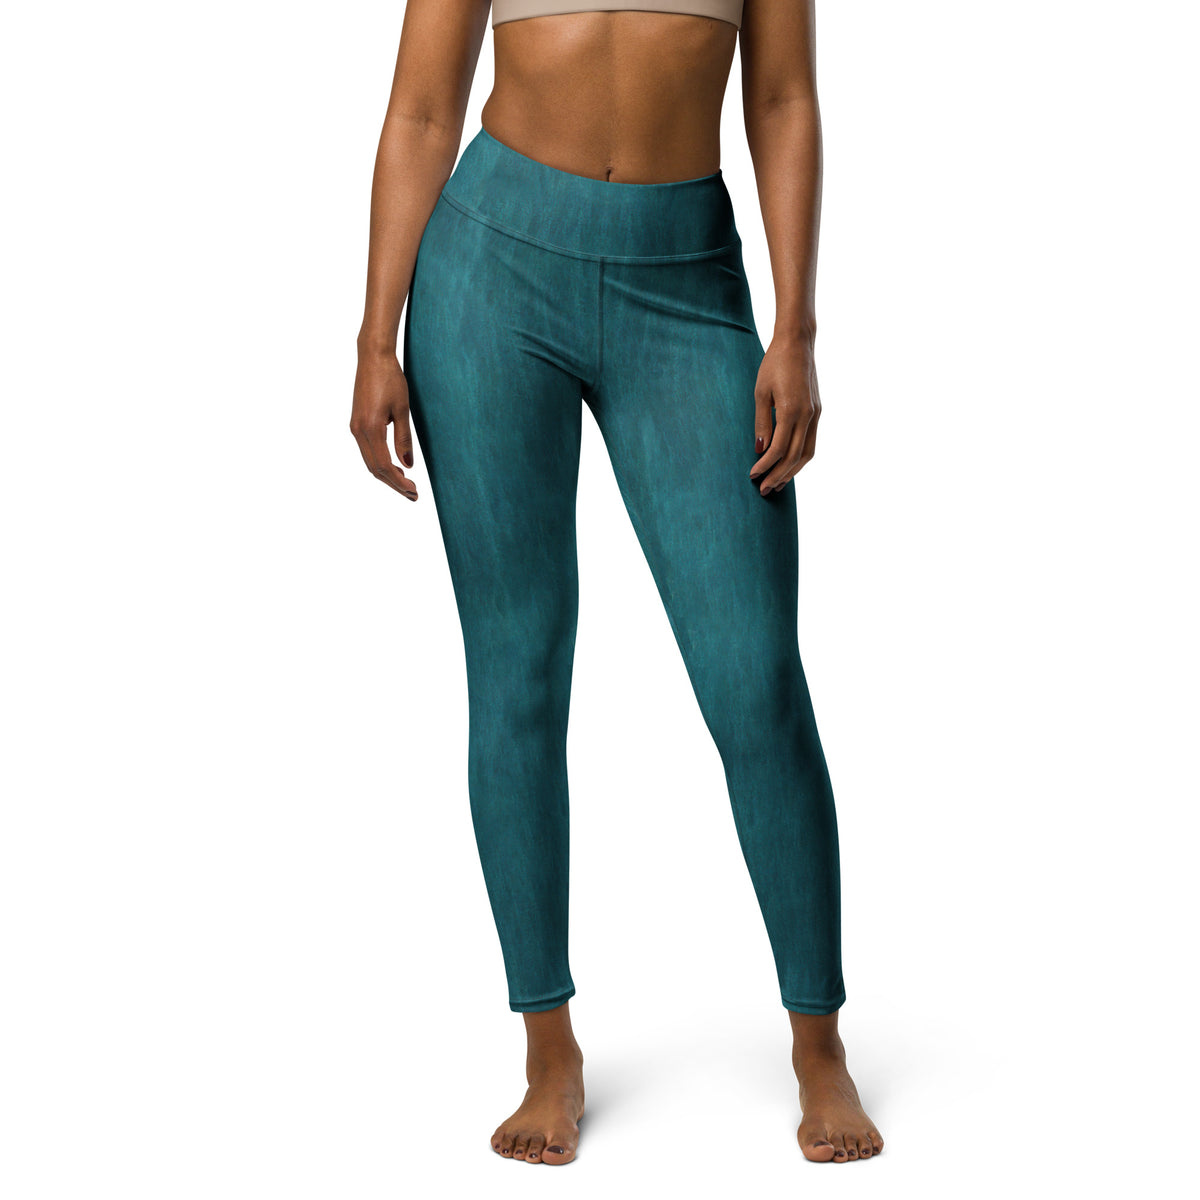 Perfect Fit Cable Knit Zen Leggings for Workout and Casual Wear